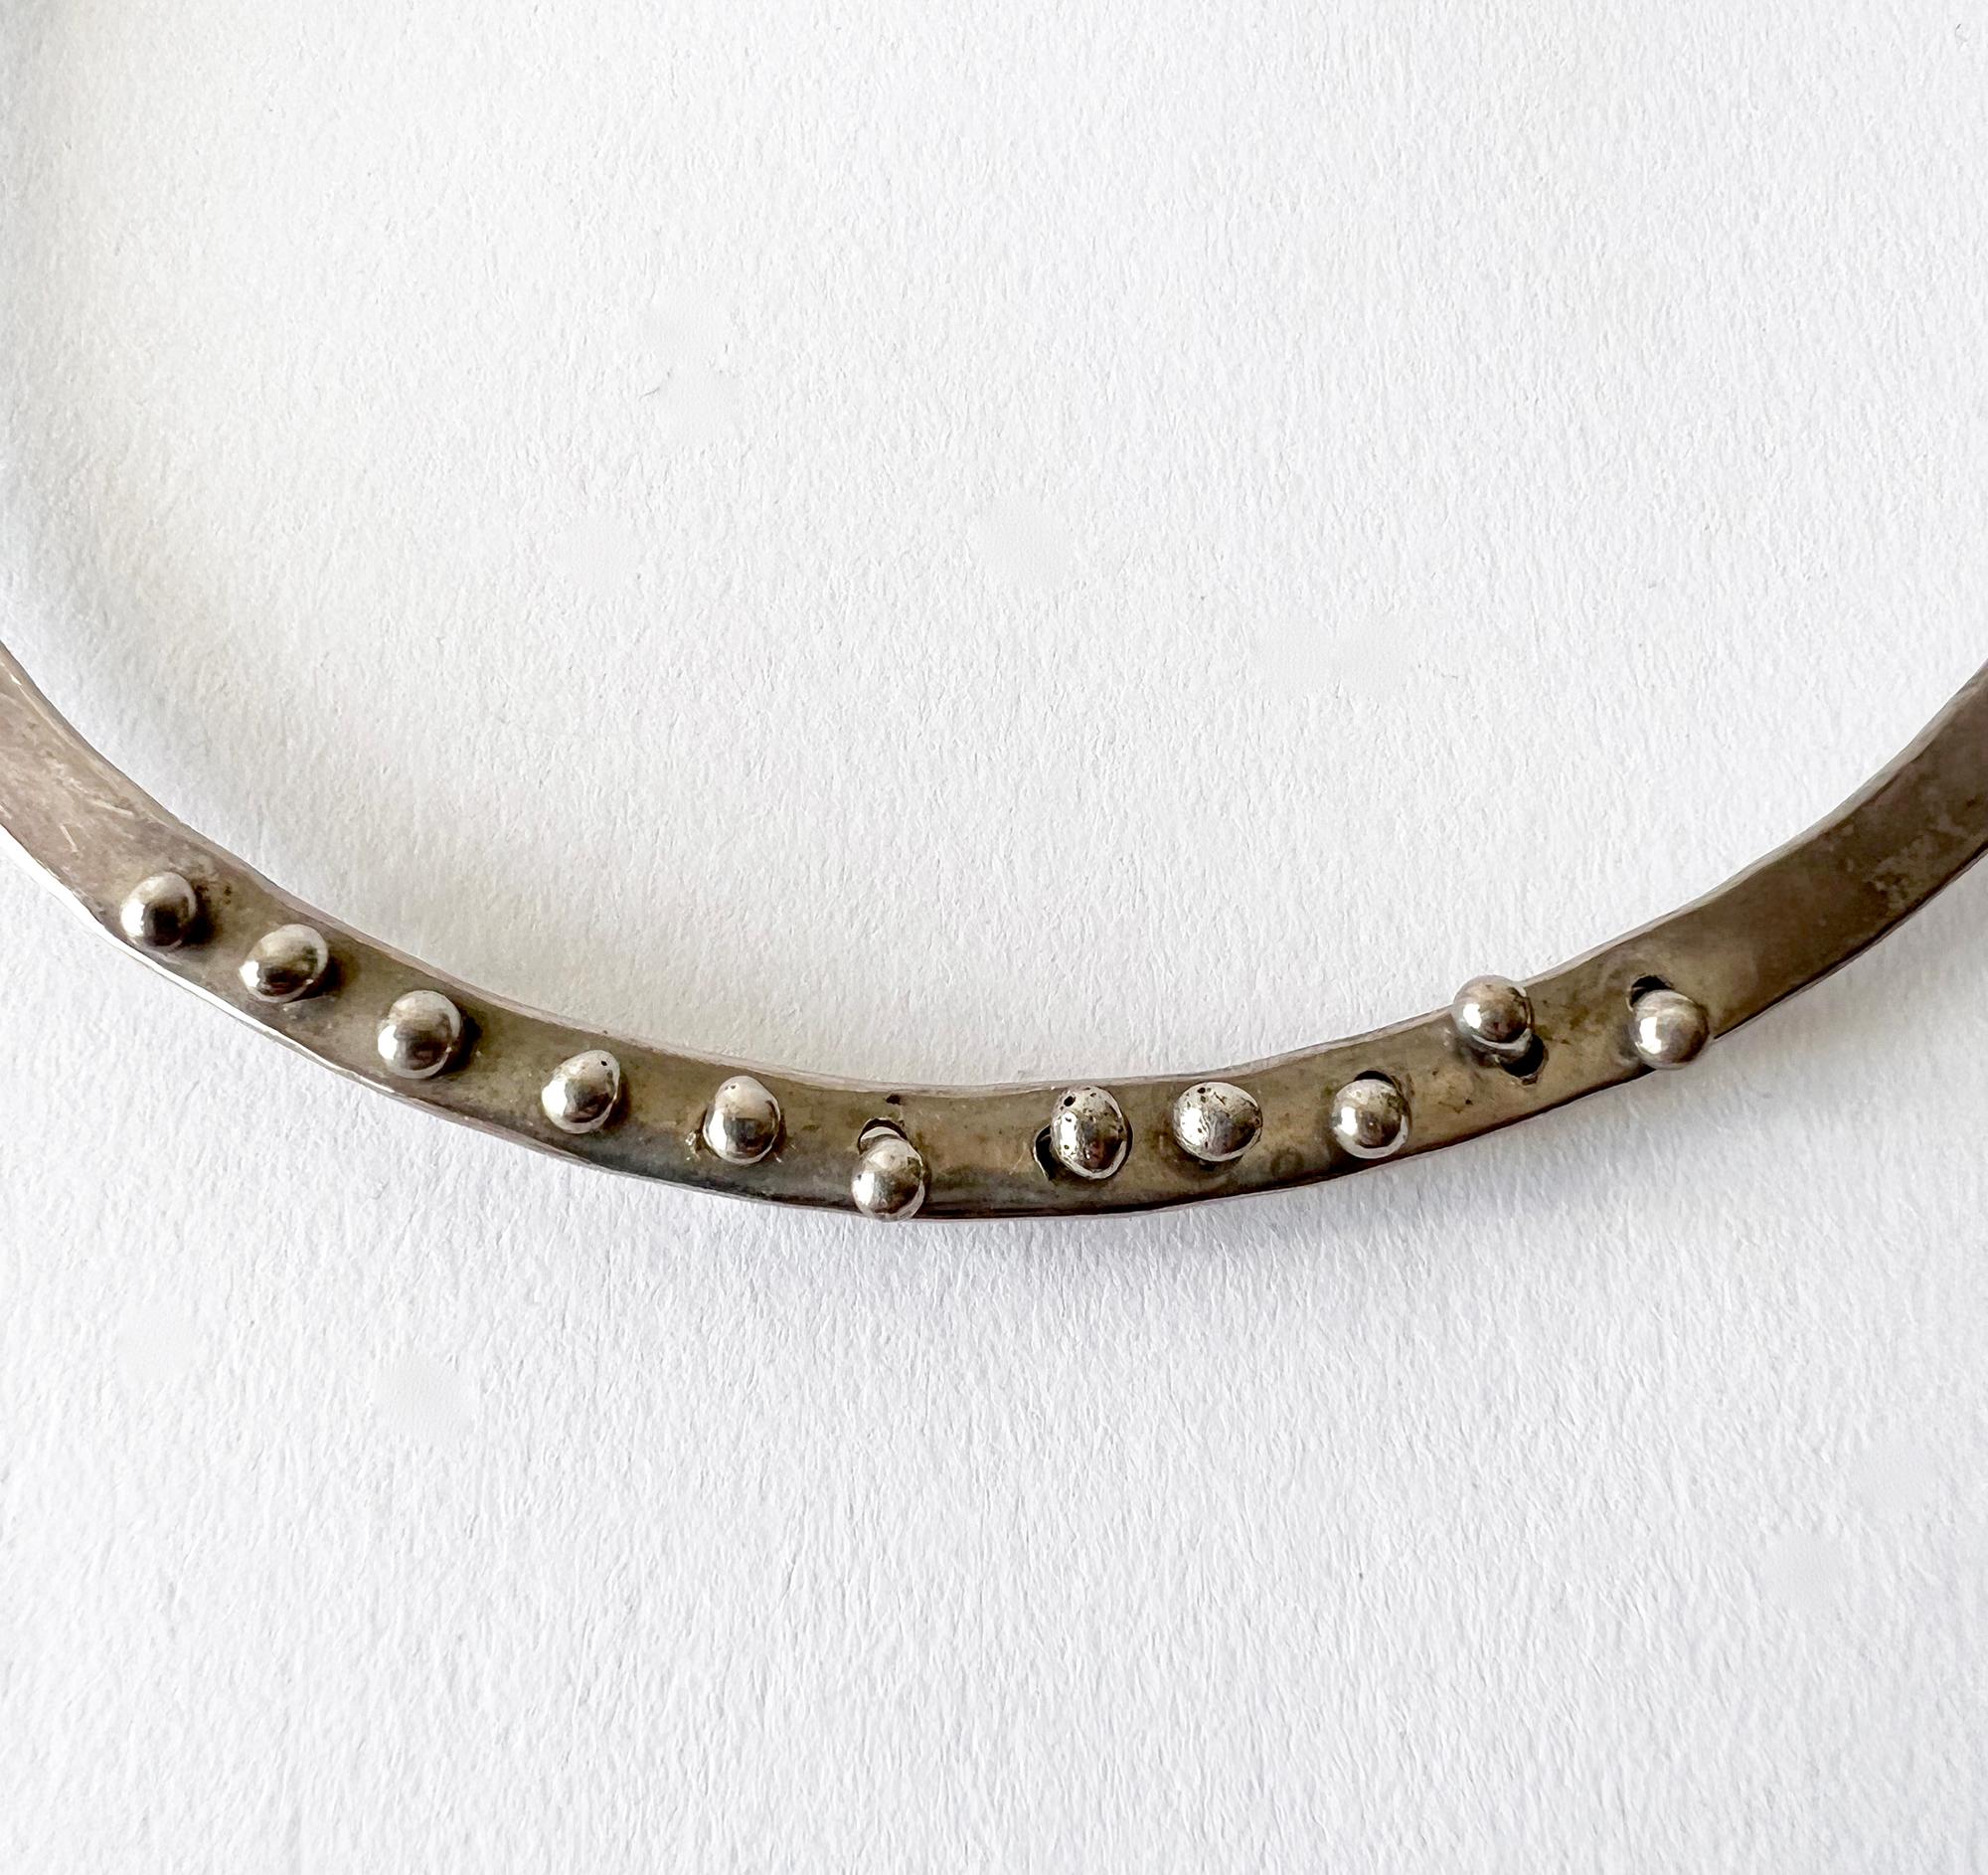 Hand wrought sterling silver torque choker necklace with peg design created by Jack Boyd of San Diego, California.  Necklace measures approximately 17